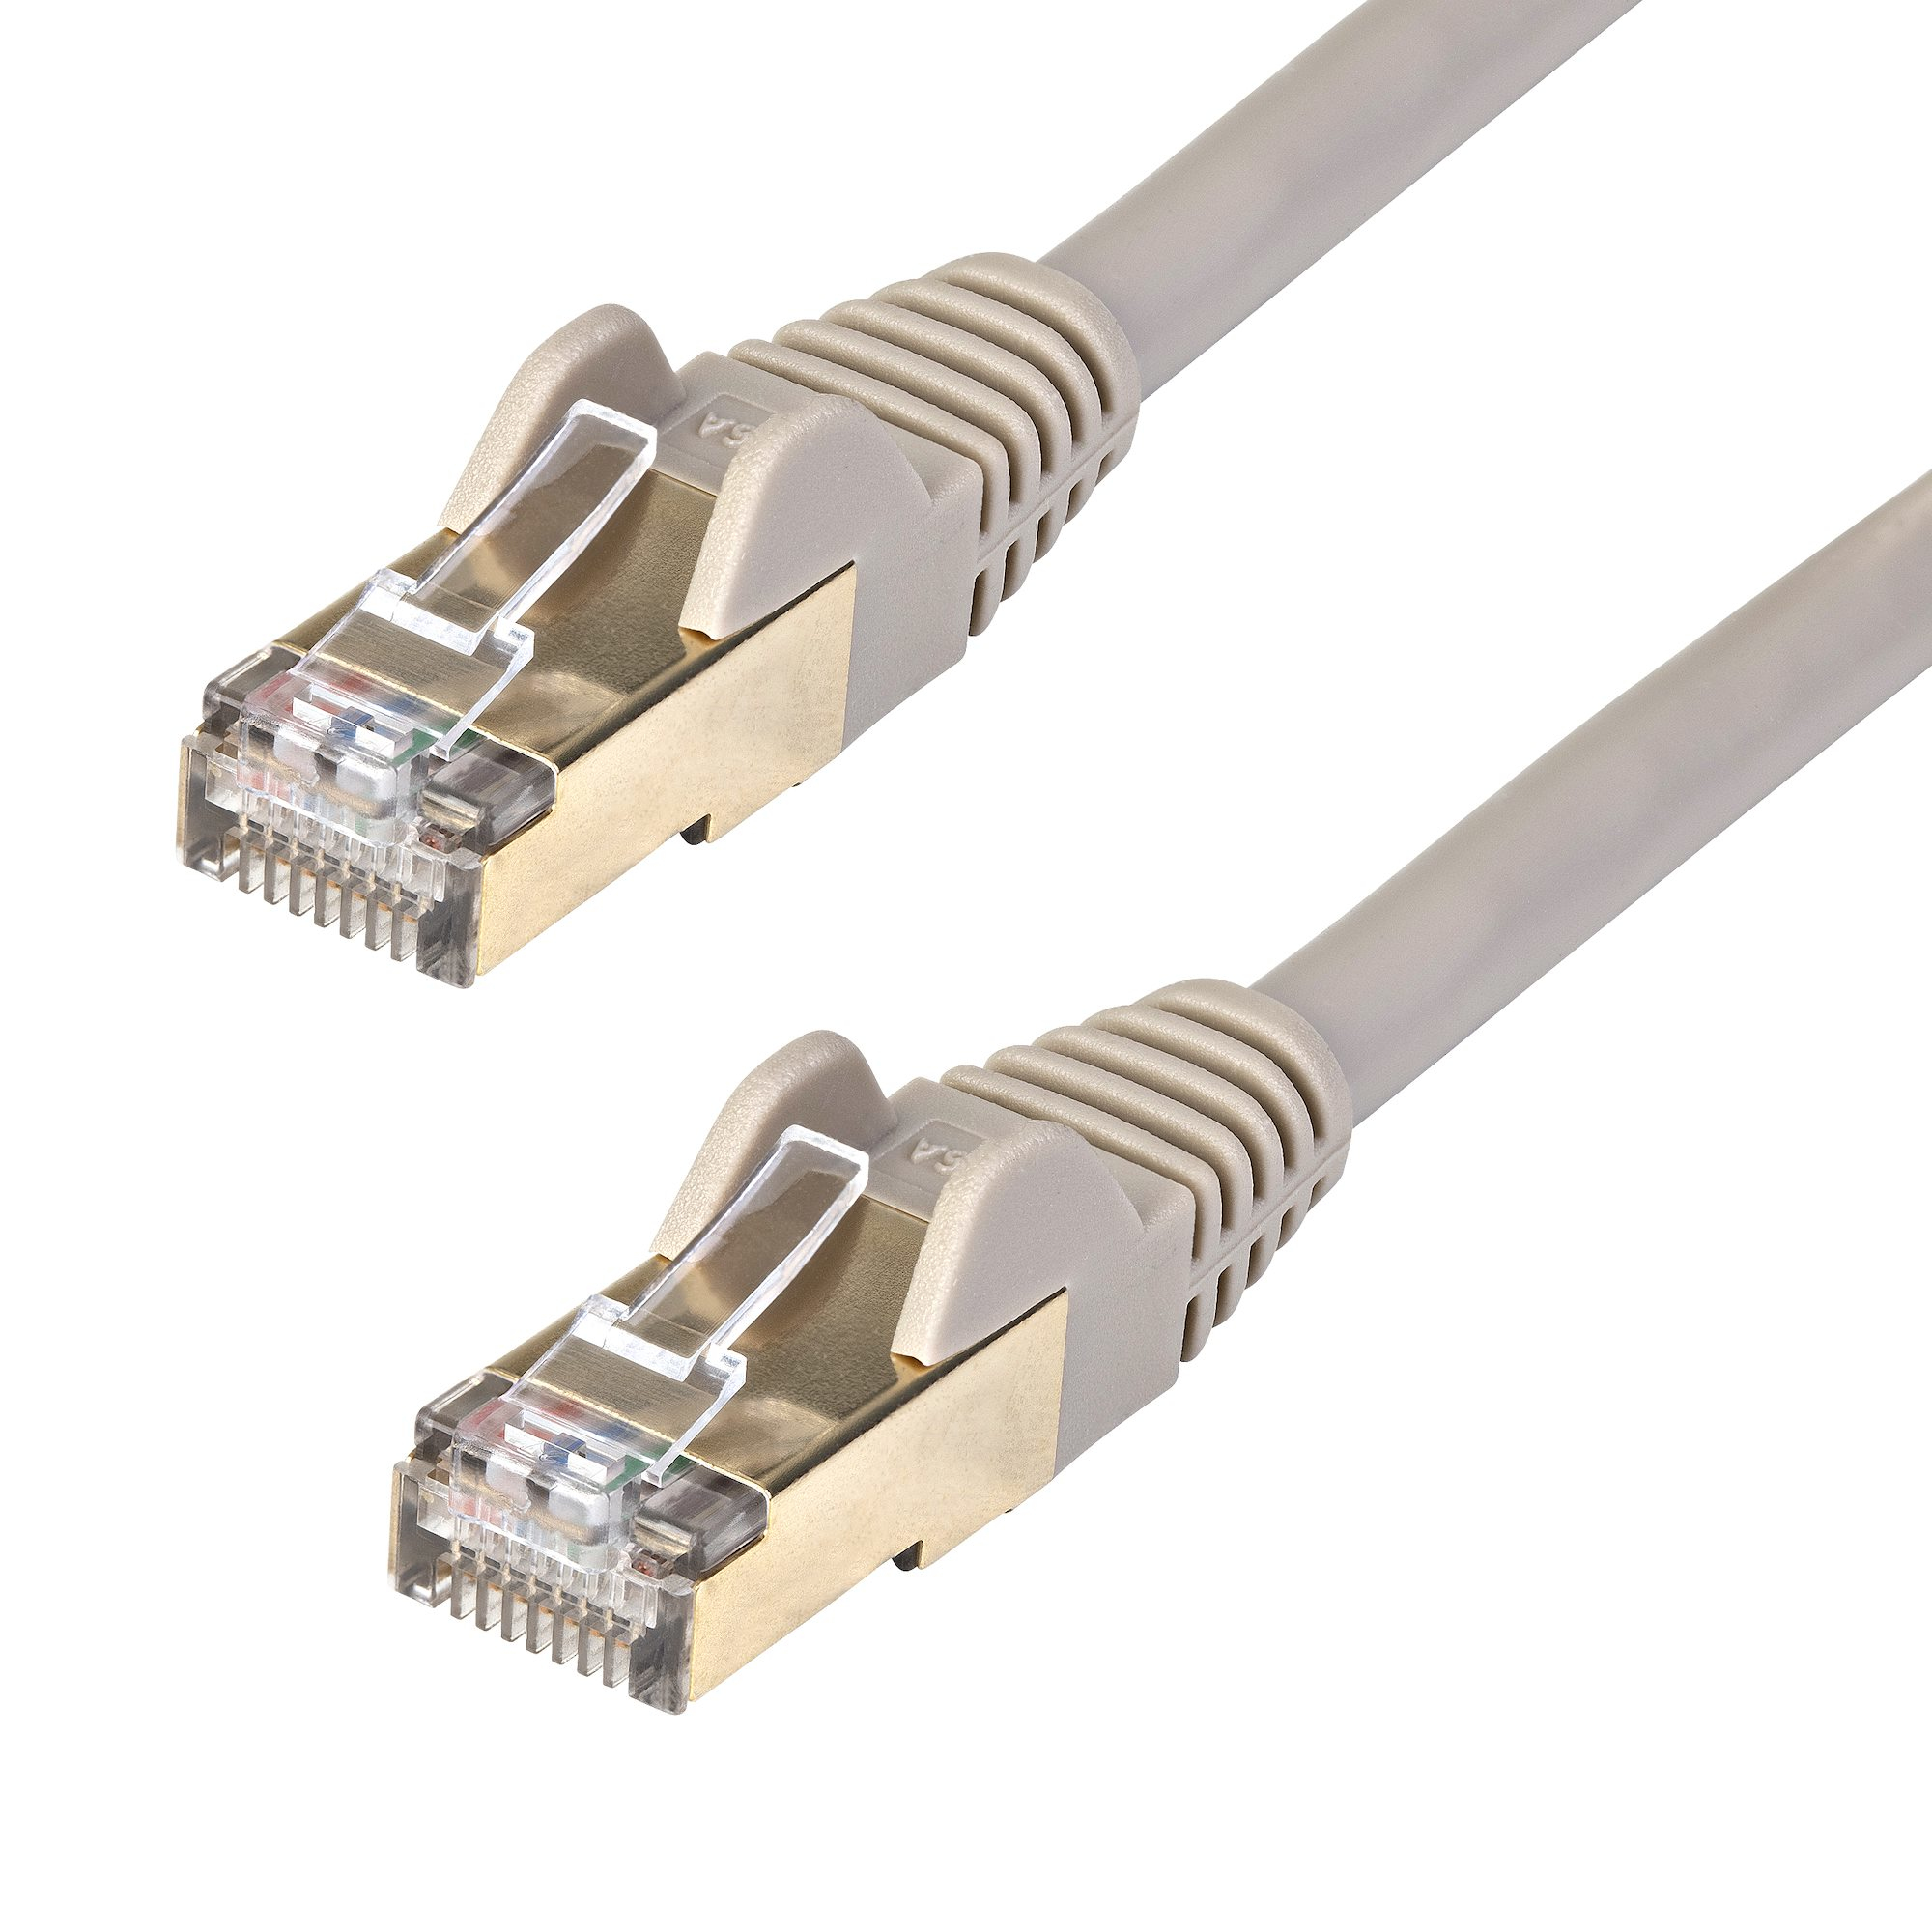 StarTech.com 5m CAT6a Ethernet Cable - 10 Gigabit Shielded Snagless RJ45 100W PoE Patch Cord - 10GbE STP Network Cable w/Strain Relief - Grey Fluke Tested/Wiring is UL Certified/TIA